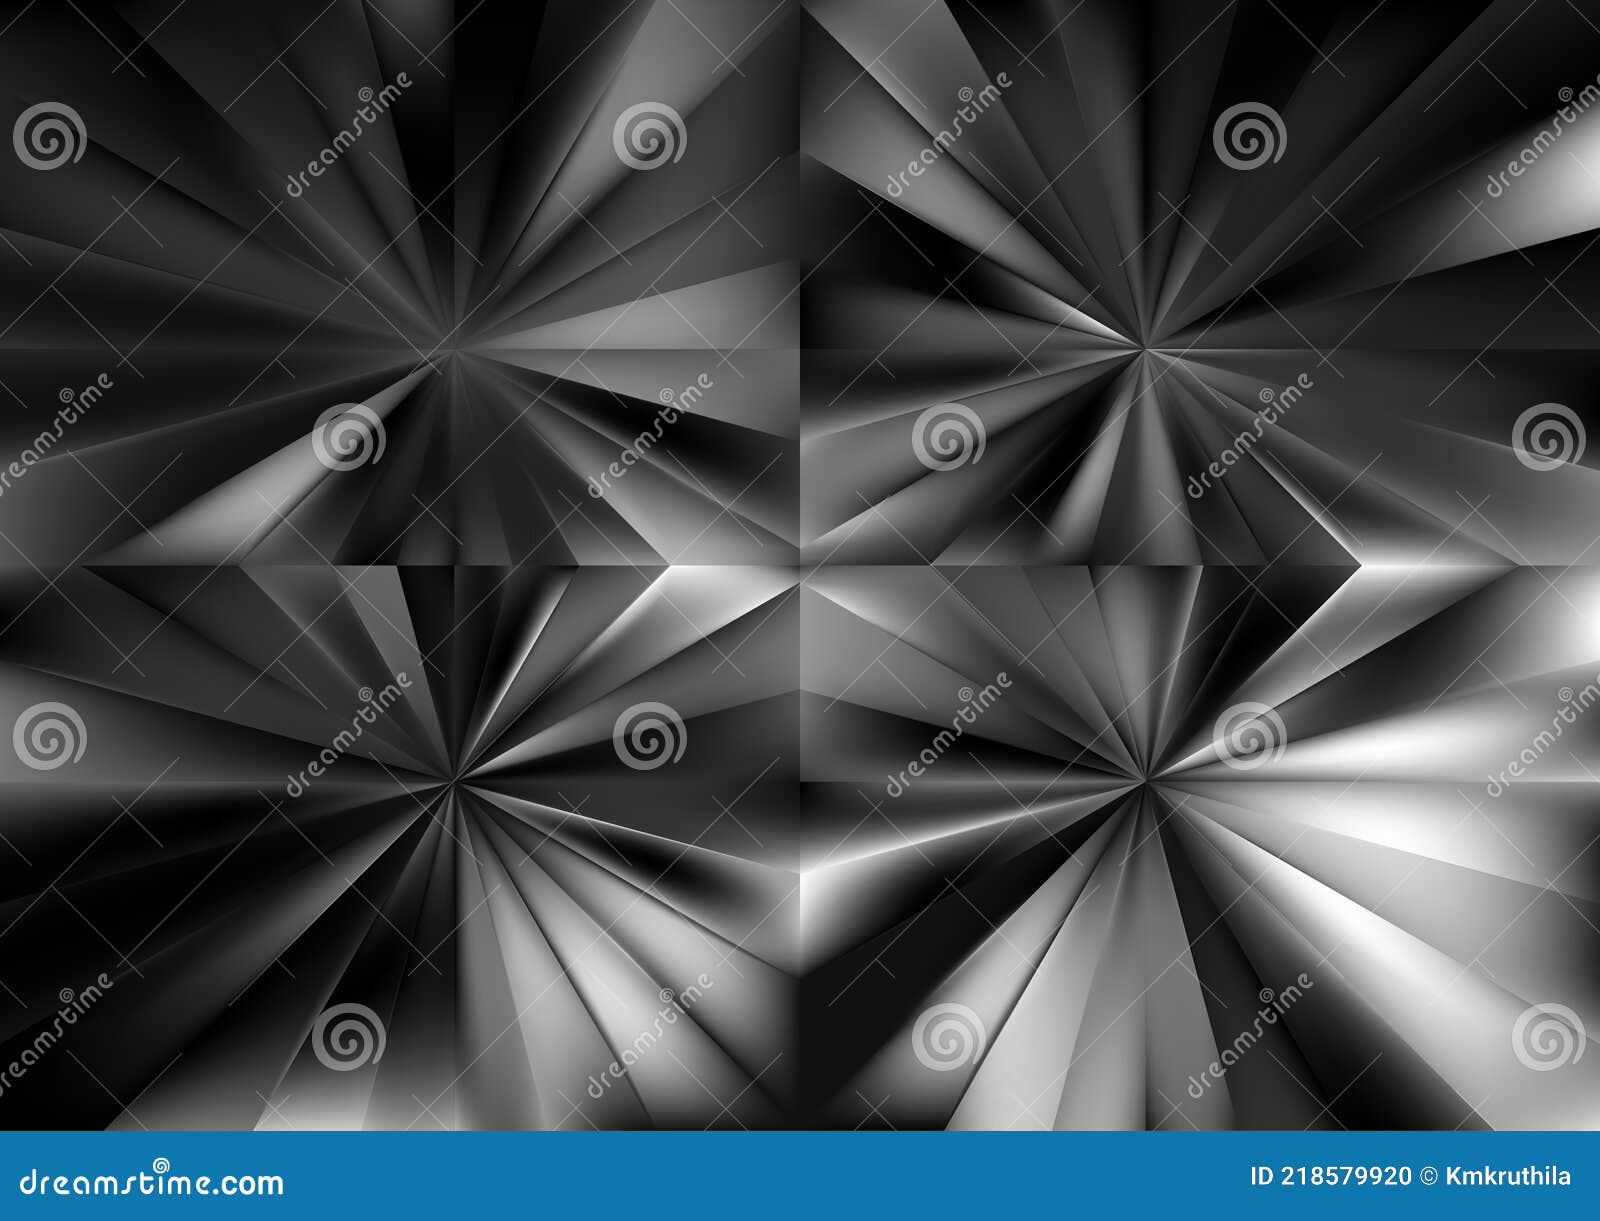 Abstract Black and Grey Radial Stripes Background Vector Art Stock ...